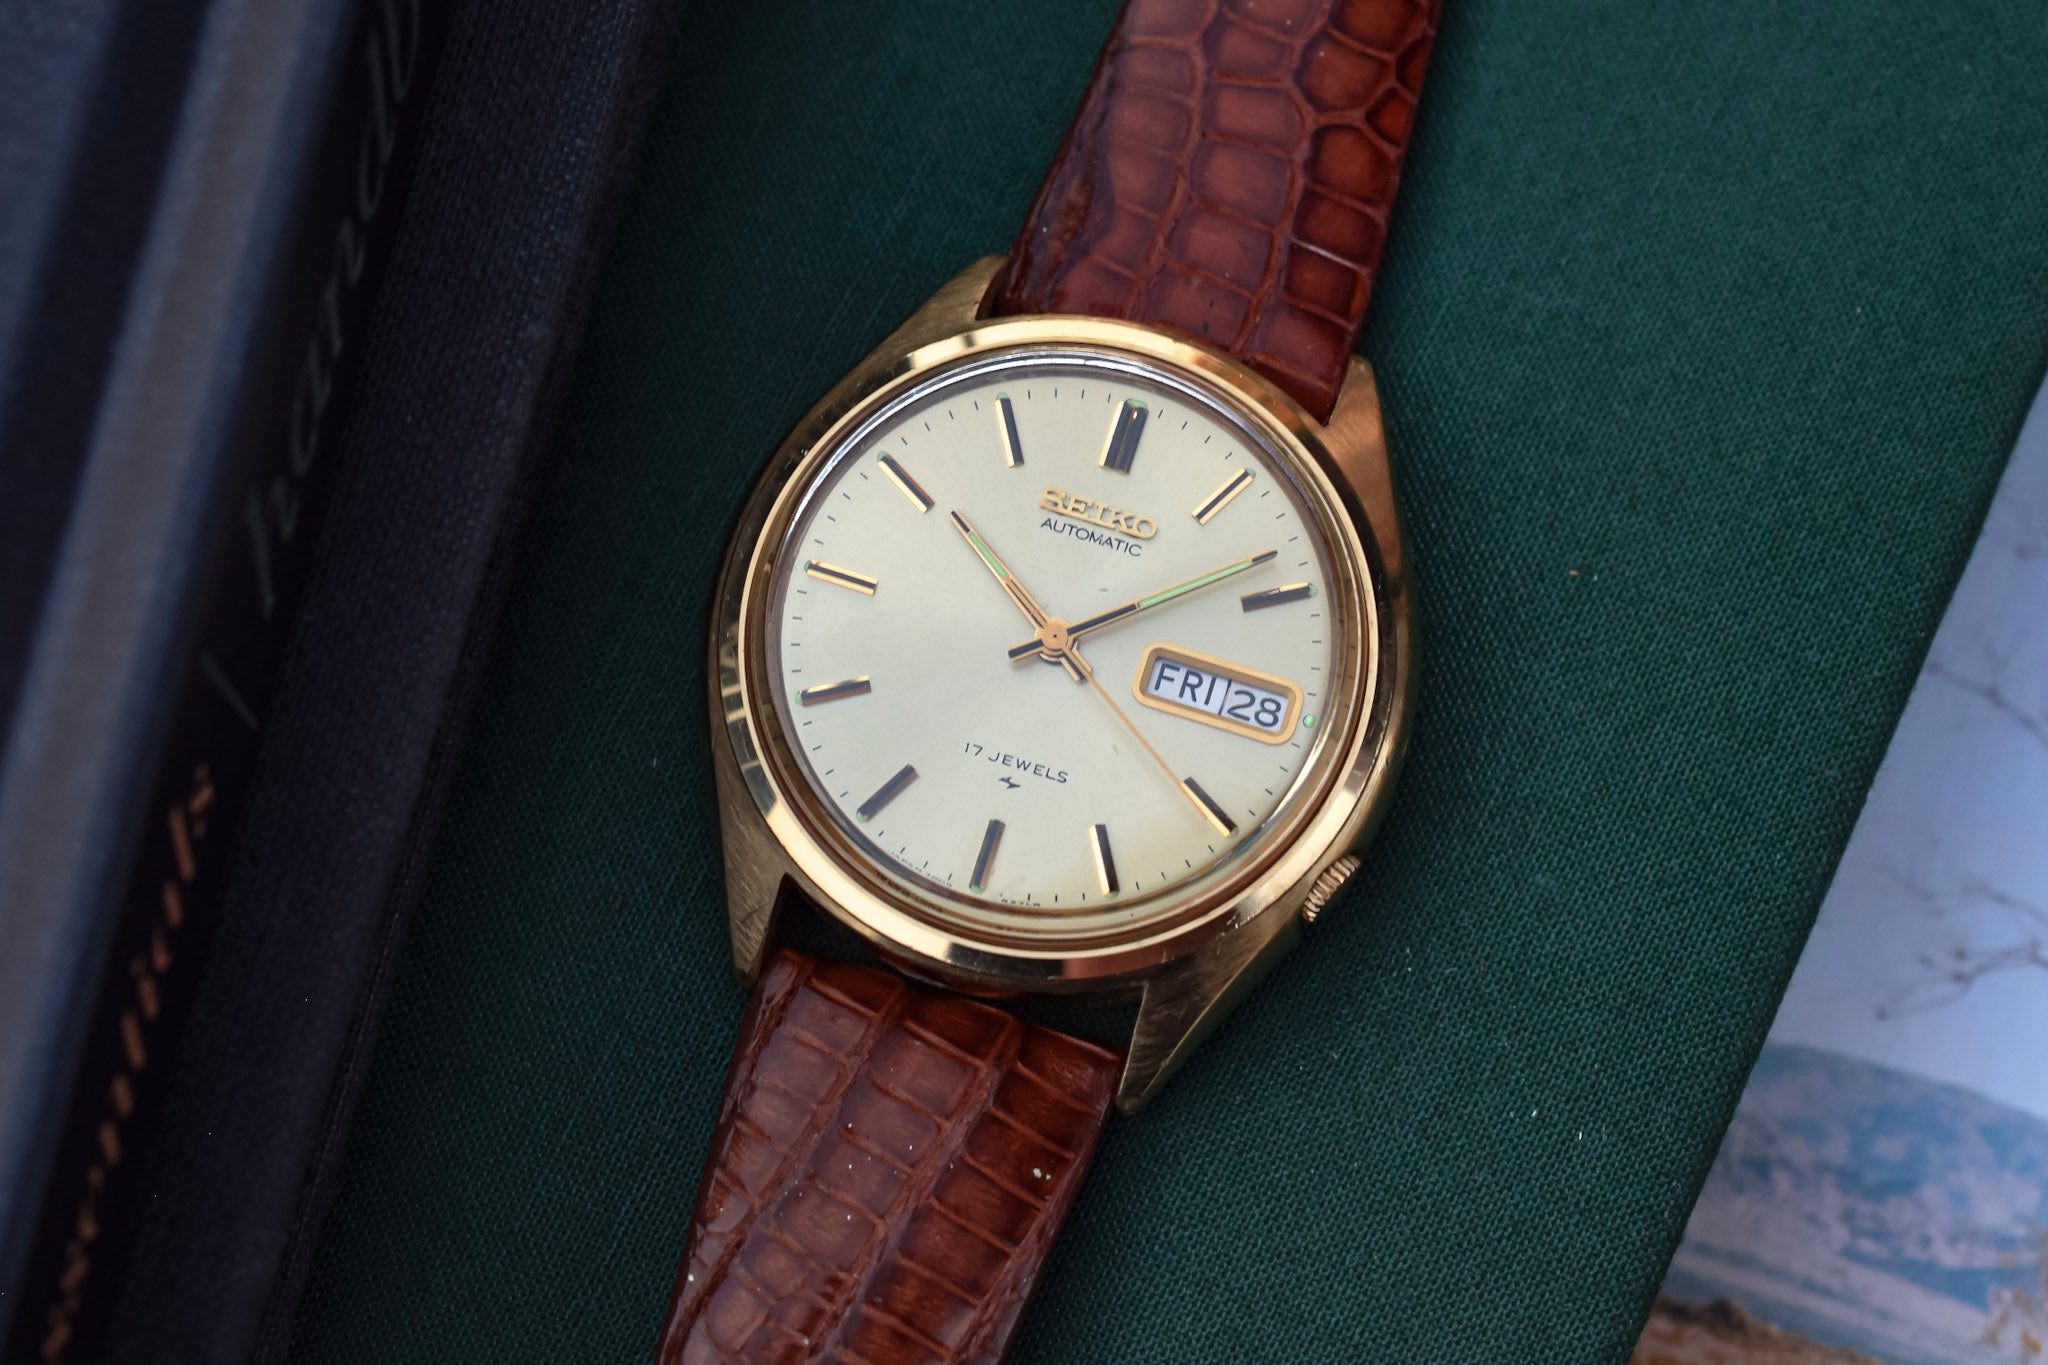 1980 Seiko Automatic Gold-Tone Day/Date Watch – Oldtimer Watch